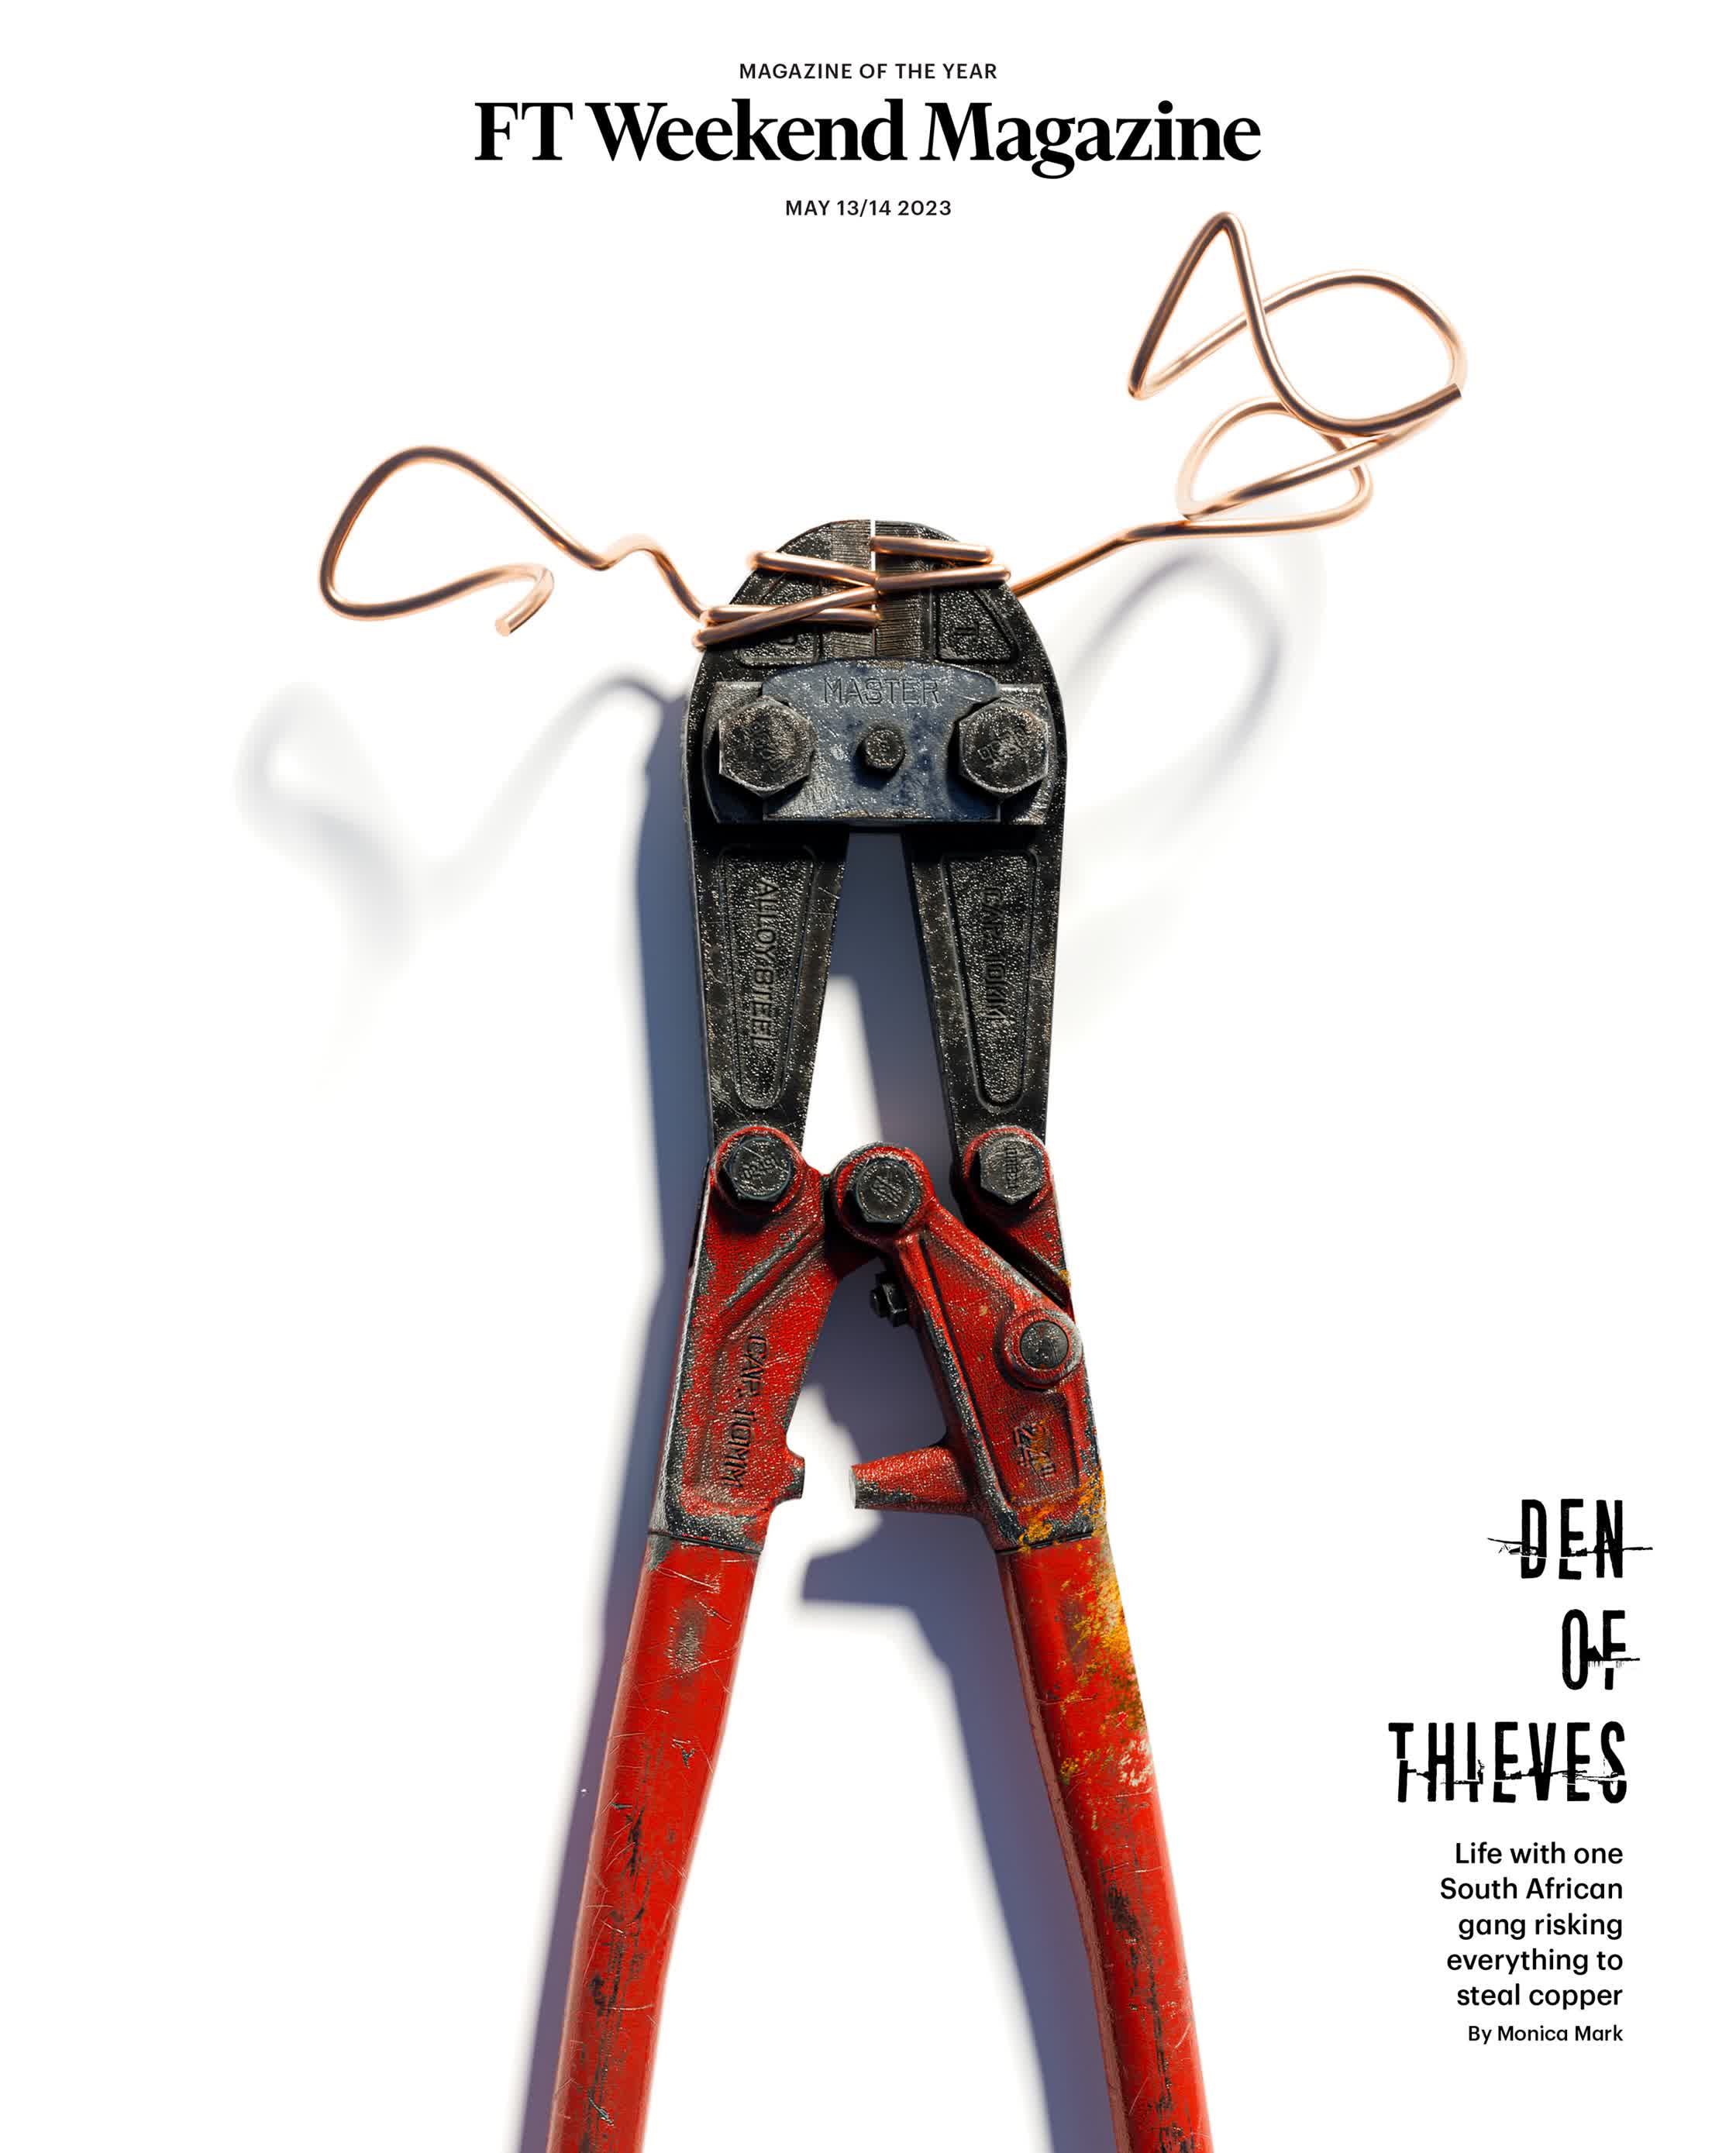 FT weekend Copper Thieves cover.jpg